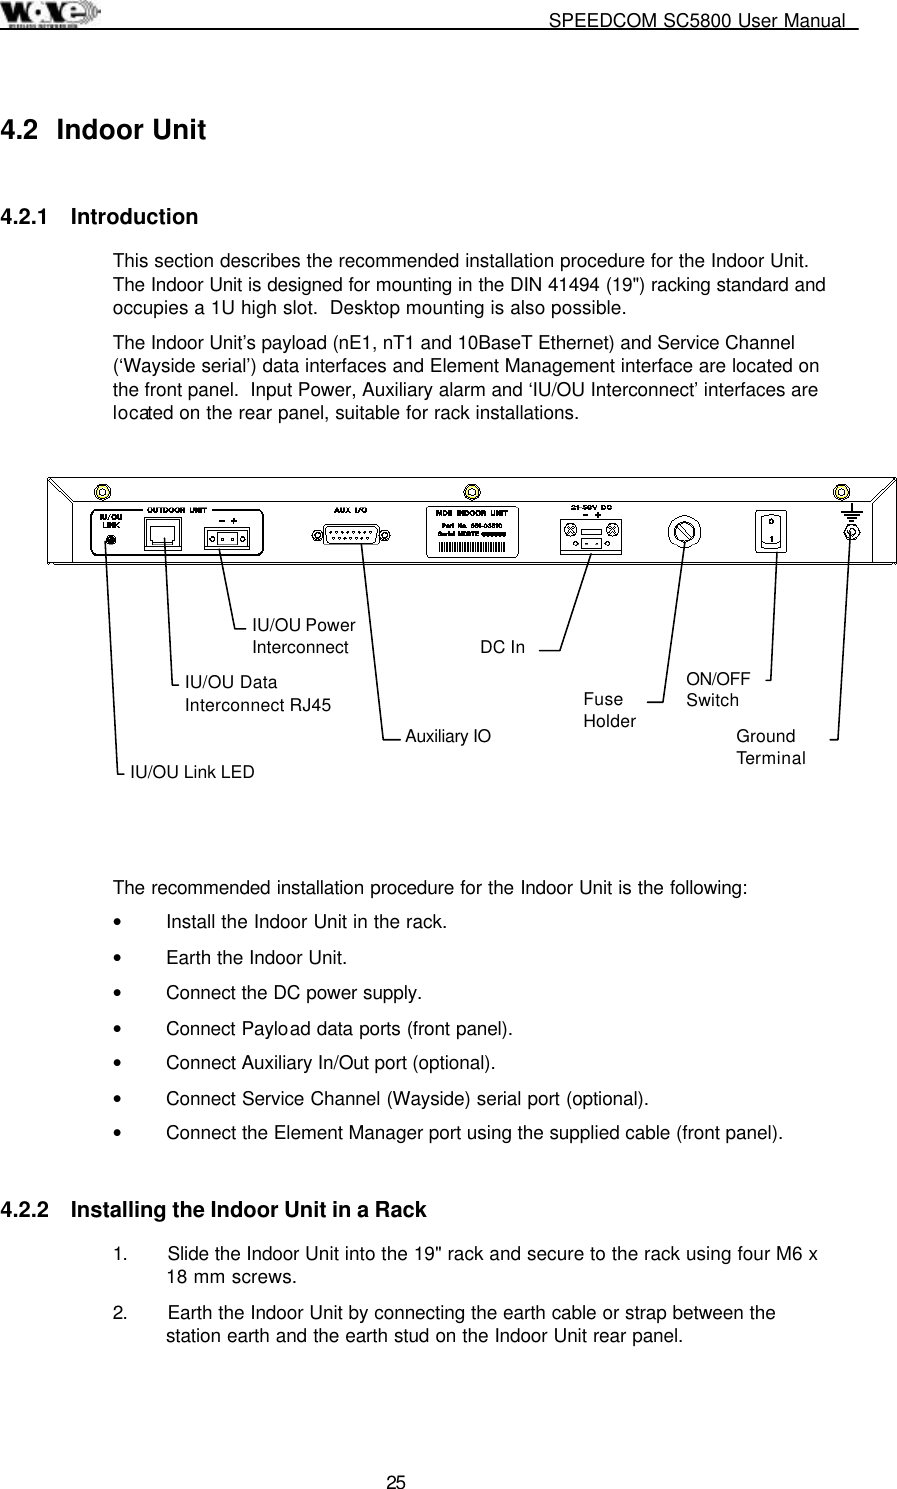     SPEEDCOM SC5800 User Manual  25 4.2 Indoor Unit 4.2.1 Introduction This section describes the recommended installation procedure for the Indoor Unit.  The Indoor Unit is designed for mounting in the DIN 41494 (19&quot;) racking standard and occupies a 1U high slot.  Desktop mounting is also possible. The Indoor Unit’s payload (nE1, nT1 and 10BaseT Ethernet) and Service Channel (‘Wayside serial’) data interfaces and Element Management interface are located on the front panel.  Input Power, Auxiliary alarm and ‘IU/OU Interconnect’ interfaces are located on the rear panel, suitable for rack installations.             The recommended installation procedure for the Indoor Unit is the following: •  Install the Indoor Unit in the rack. •  Earth the Indoor Unit. •  Connect the DC power supply. •  Connect Payload data ports (front panel). •  Connect Auxiliary In/Out port (optional).  •  Connect Service Channel (Wayside) serial port (optional). •  Connect the Element Manager port using the supplied cable (front panel). 4.2.2  Installing the Indoor Unit in a Rack 1.  Slide the Indoor Unit into the 19&quot; rack and secure to the rack using four M6 x 18 mm screws. 2.  Earth the Indoor Unit by connecting the earth cable or strap between the station earth and the earth stud on the Indoor Unit rear panel.   IU/OU Link LED IU/OU Data Interconnect RJ45 IU/OU Power Interconnect  Auxiliary IO   DC In  Fuse Holder   ON/OFF Switch   Ground Terminal   